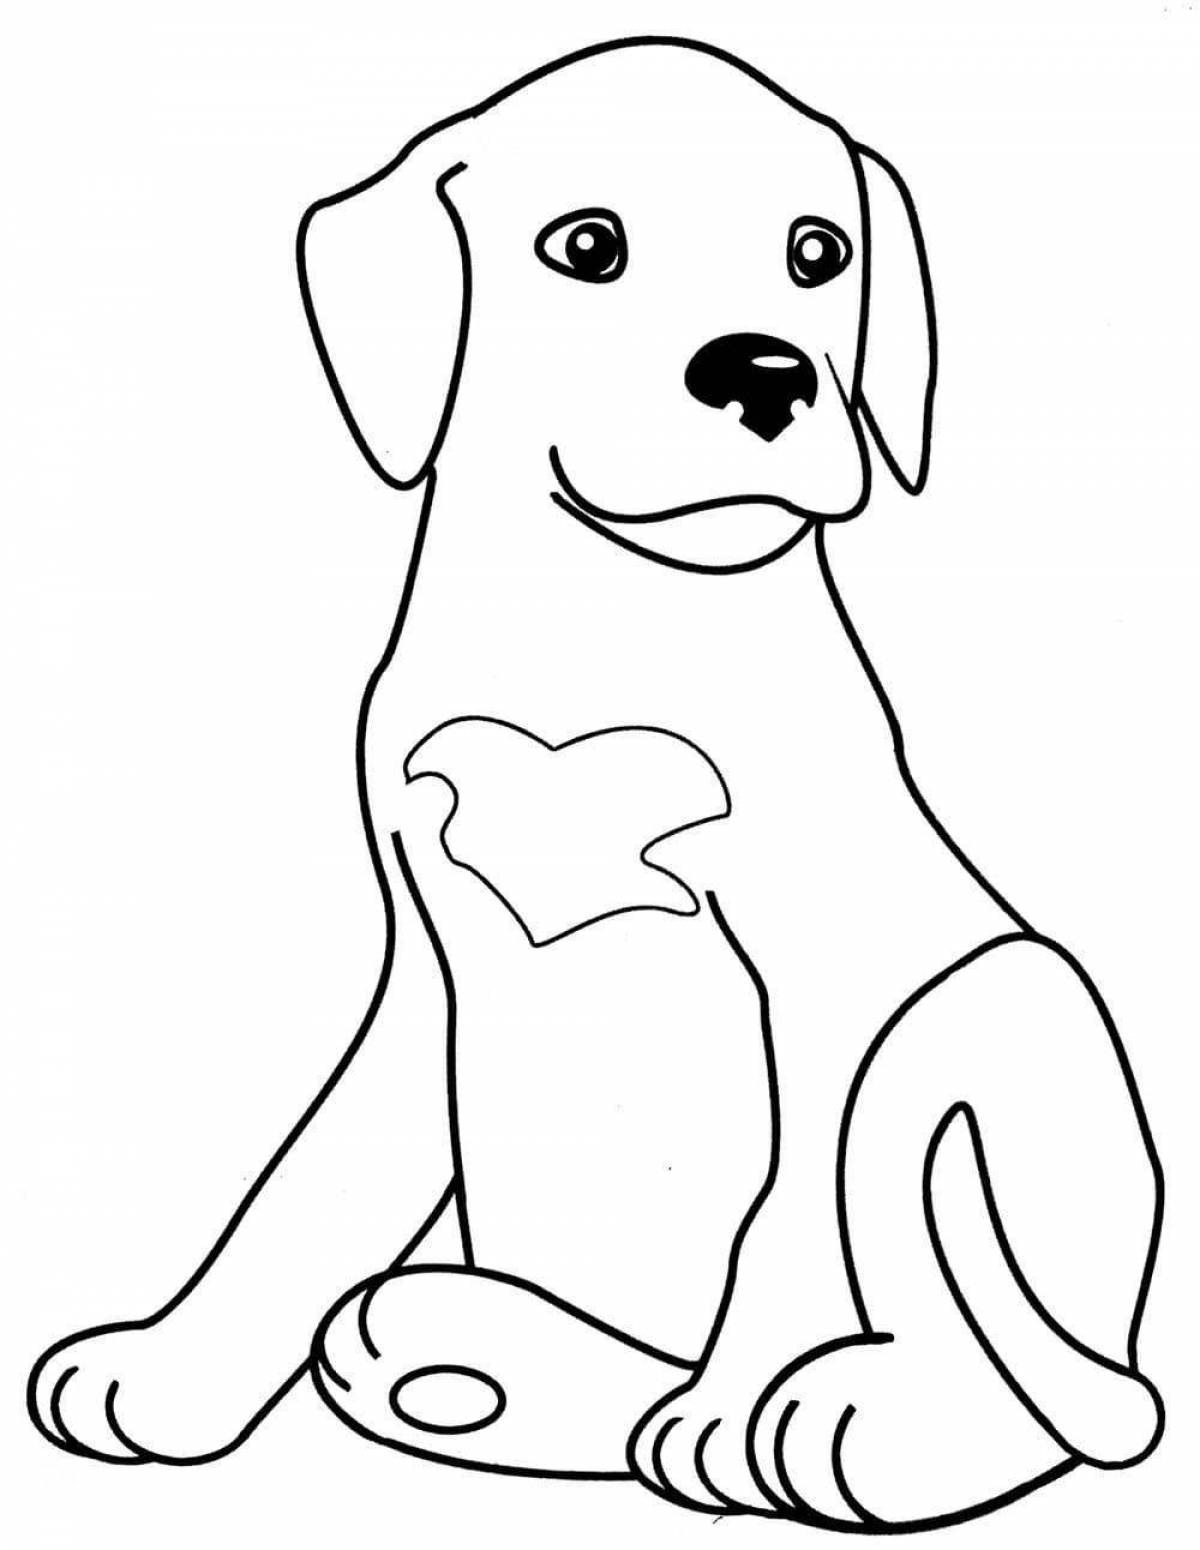 Chipper doggy coloring page